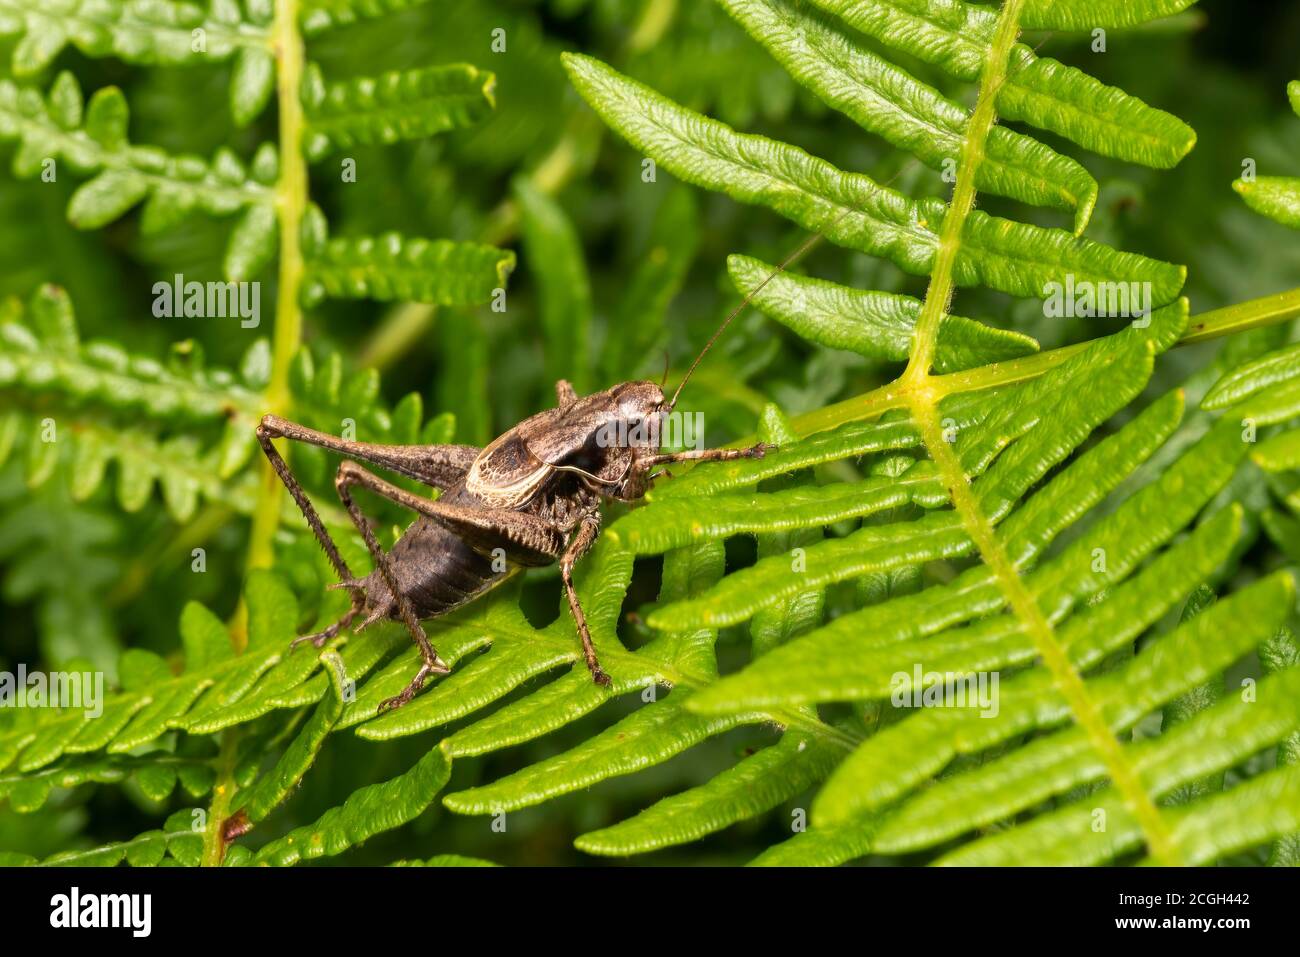 Pholidoptera griseoaptera (Dark Bush Cricket) a common brown insect species found in fields meadows and gardens stock photo Stock Photo